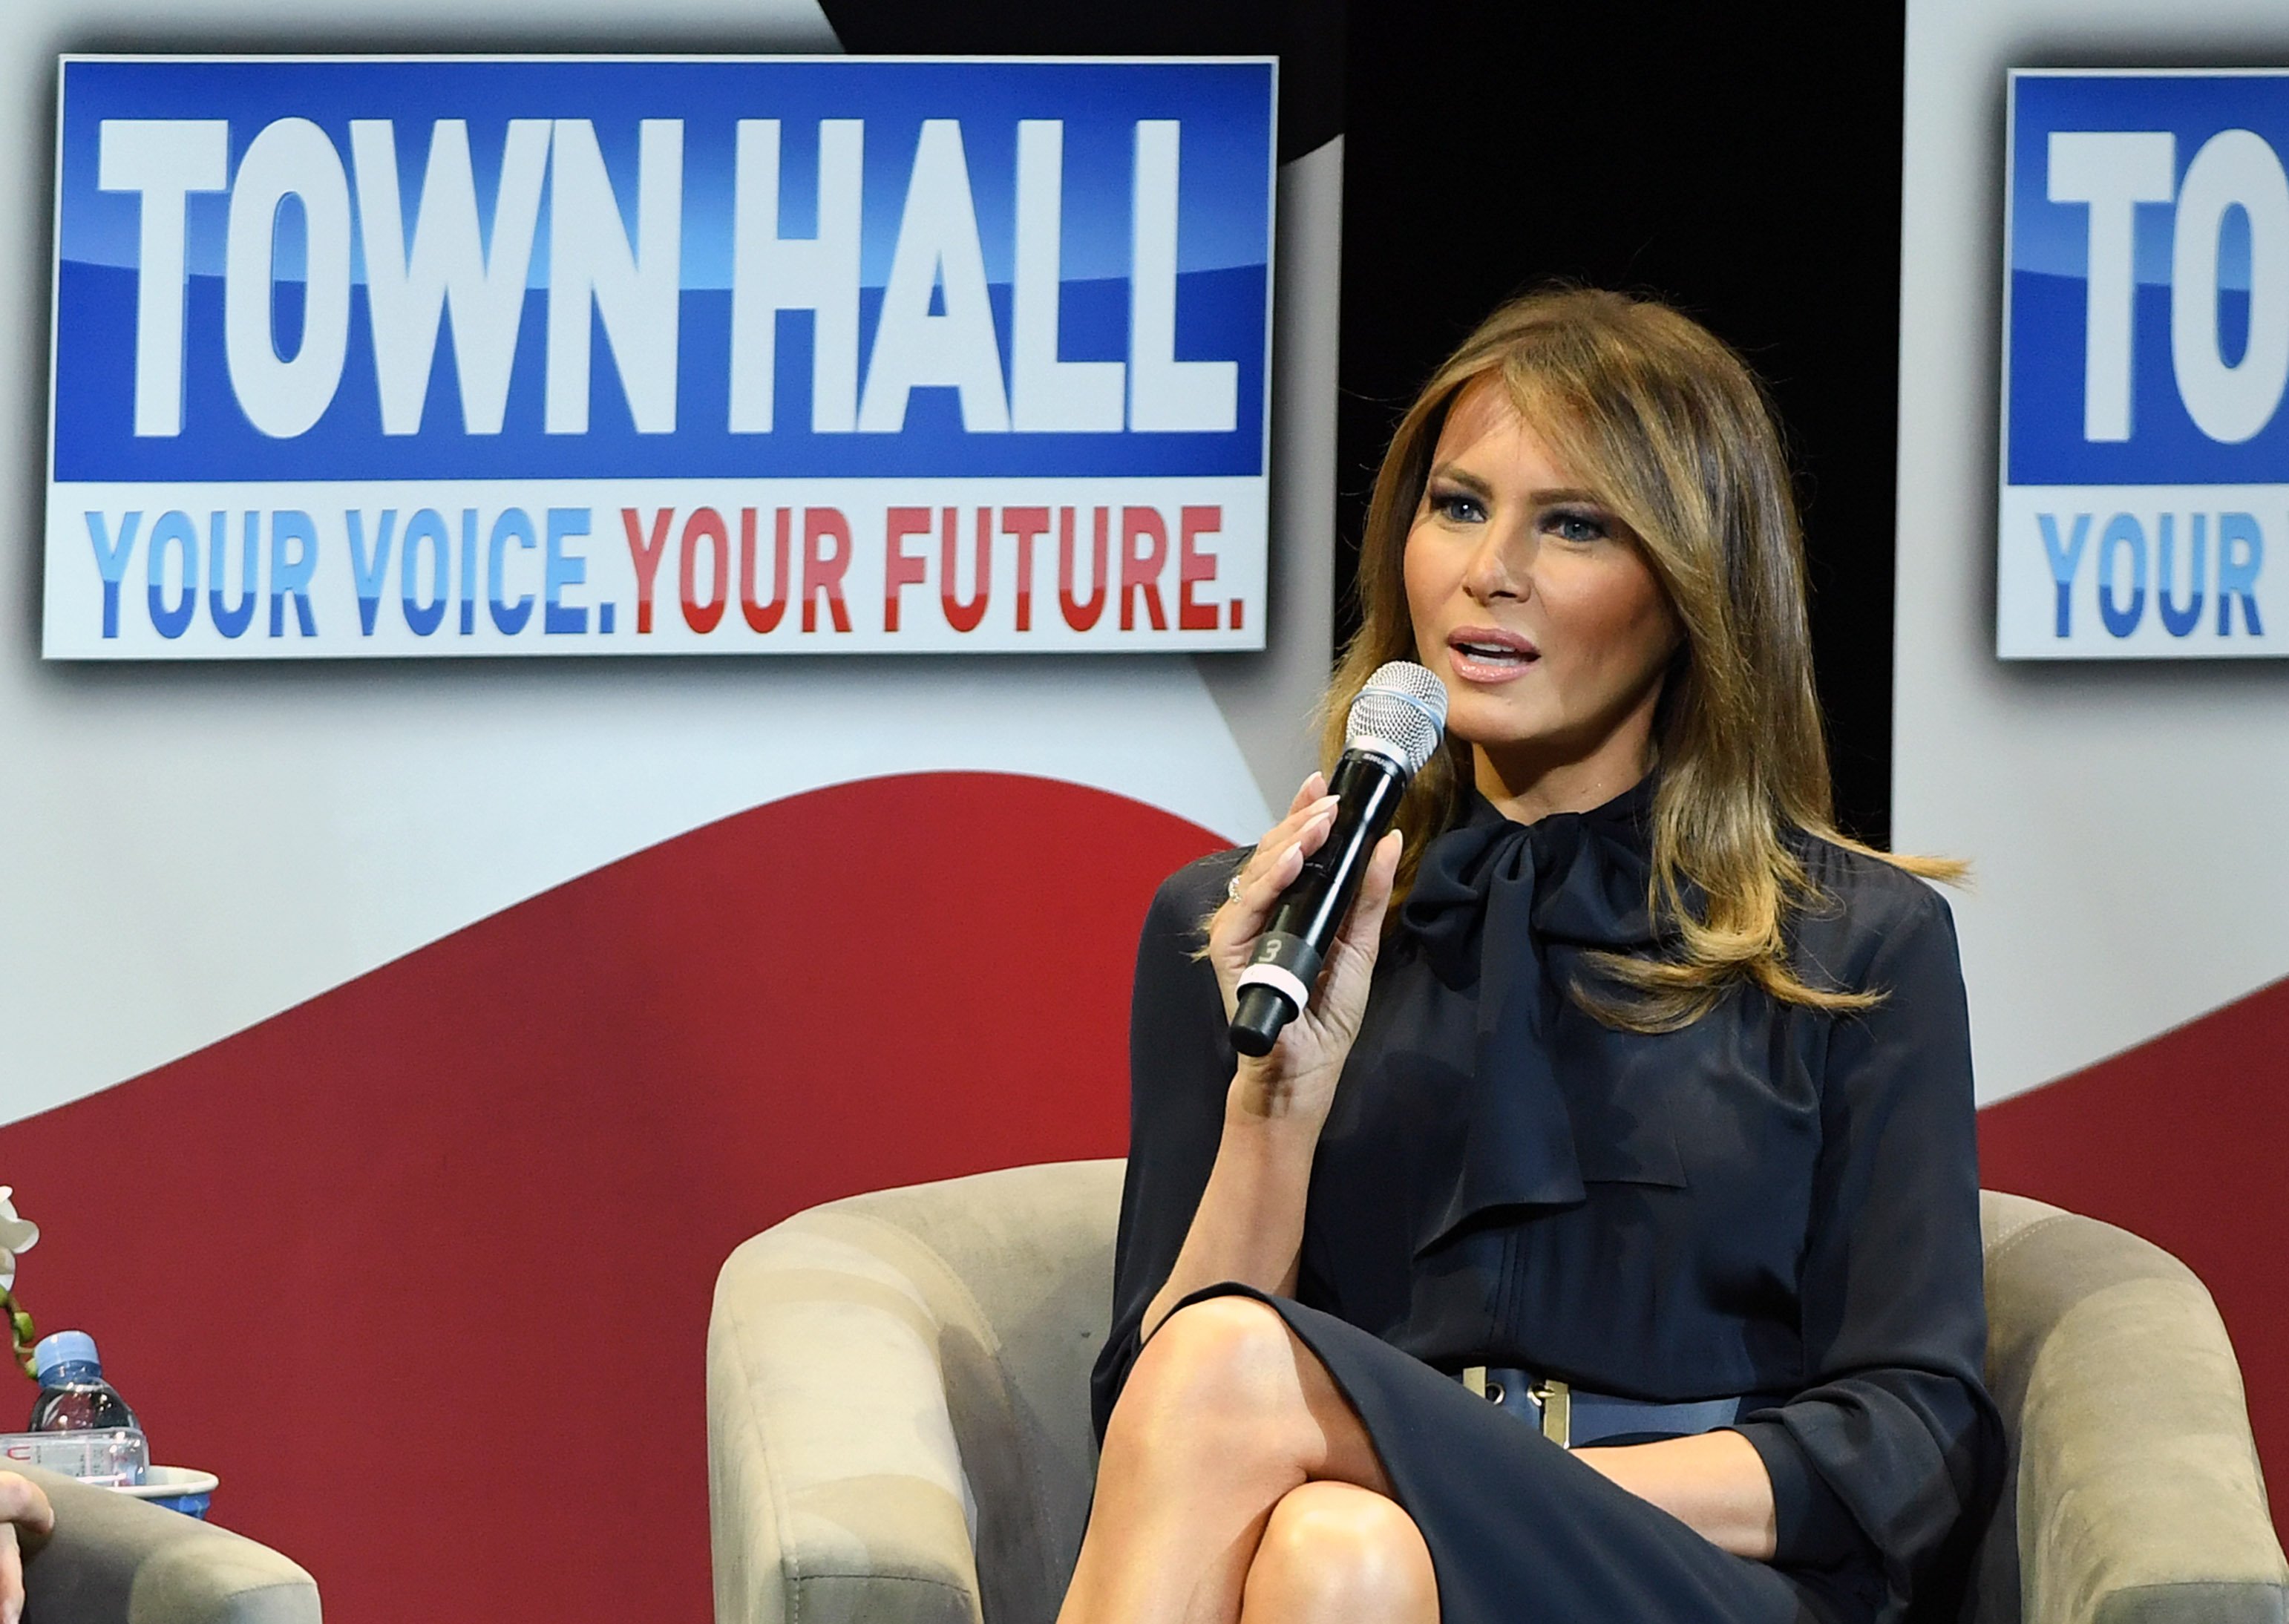 Melania Trump at a town hall in Las Vegas for her Be Best tour on February 5, 2019 | Photo: Getty Images